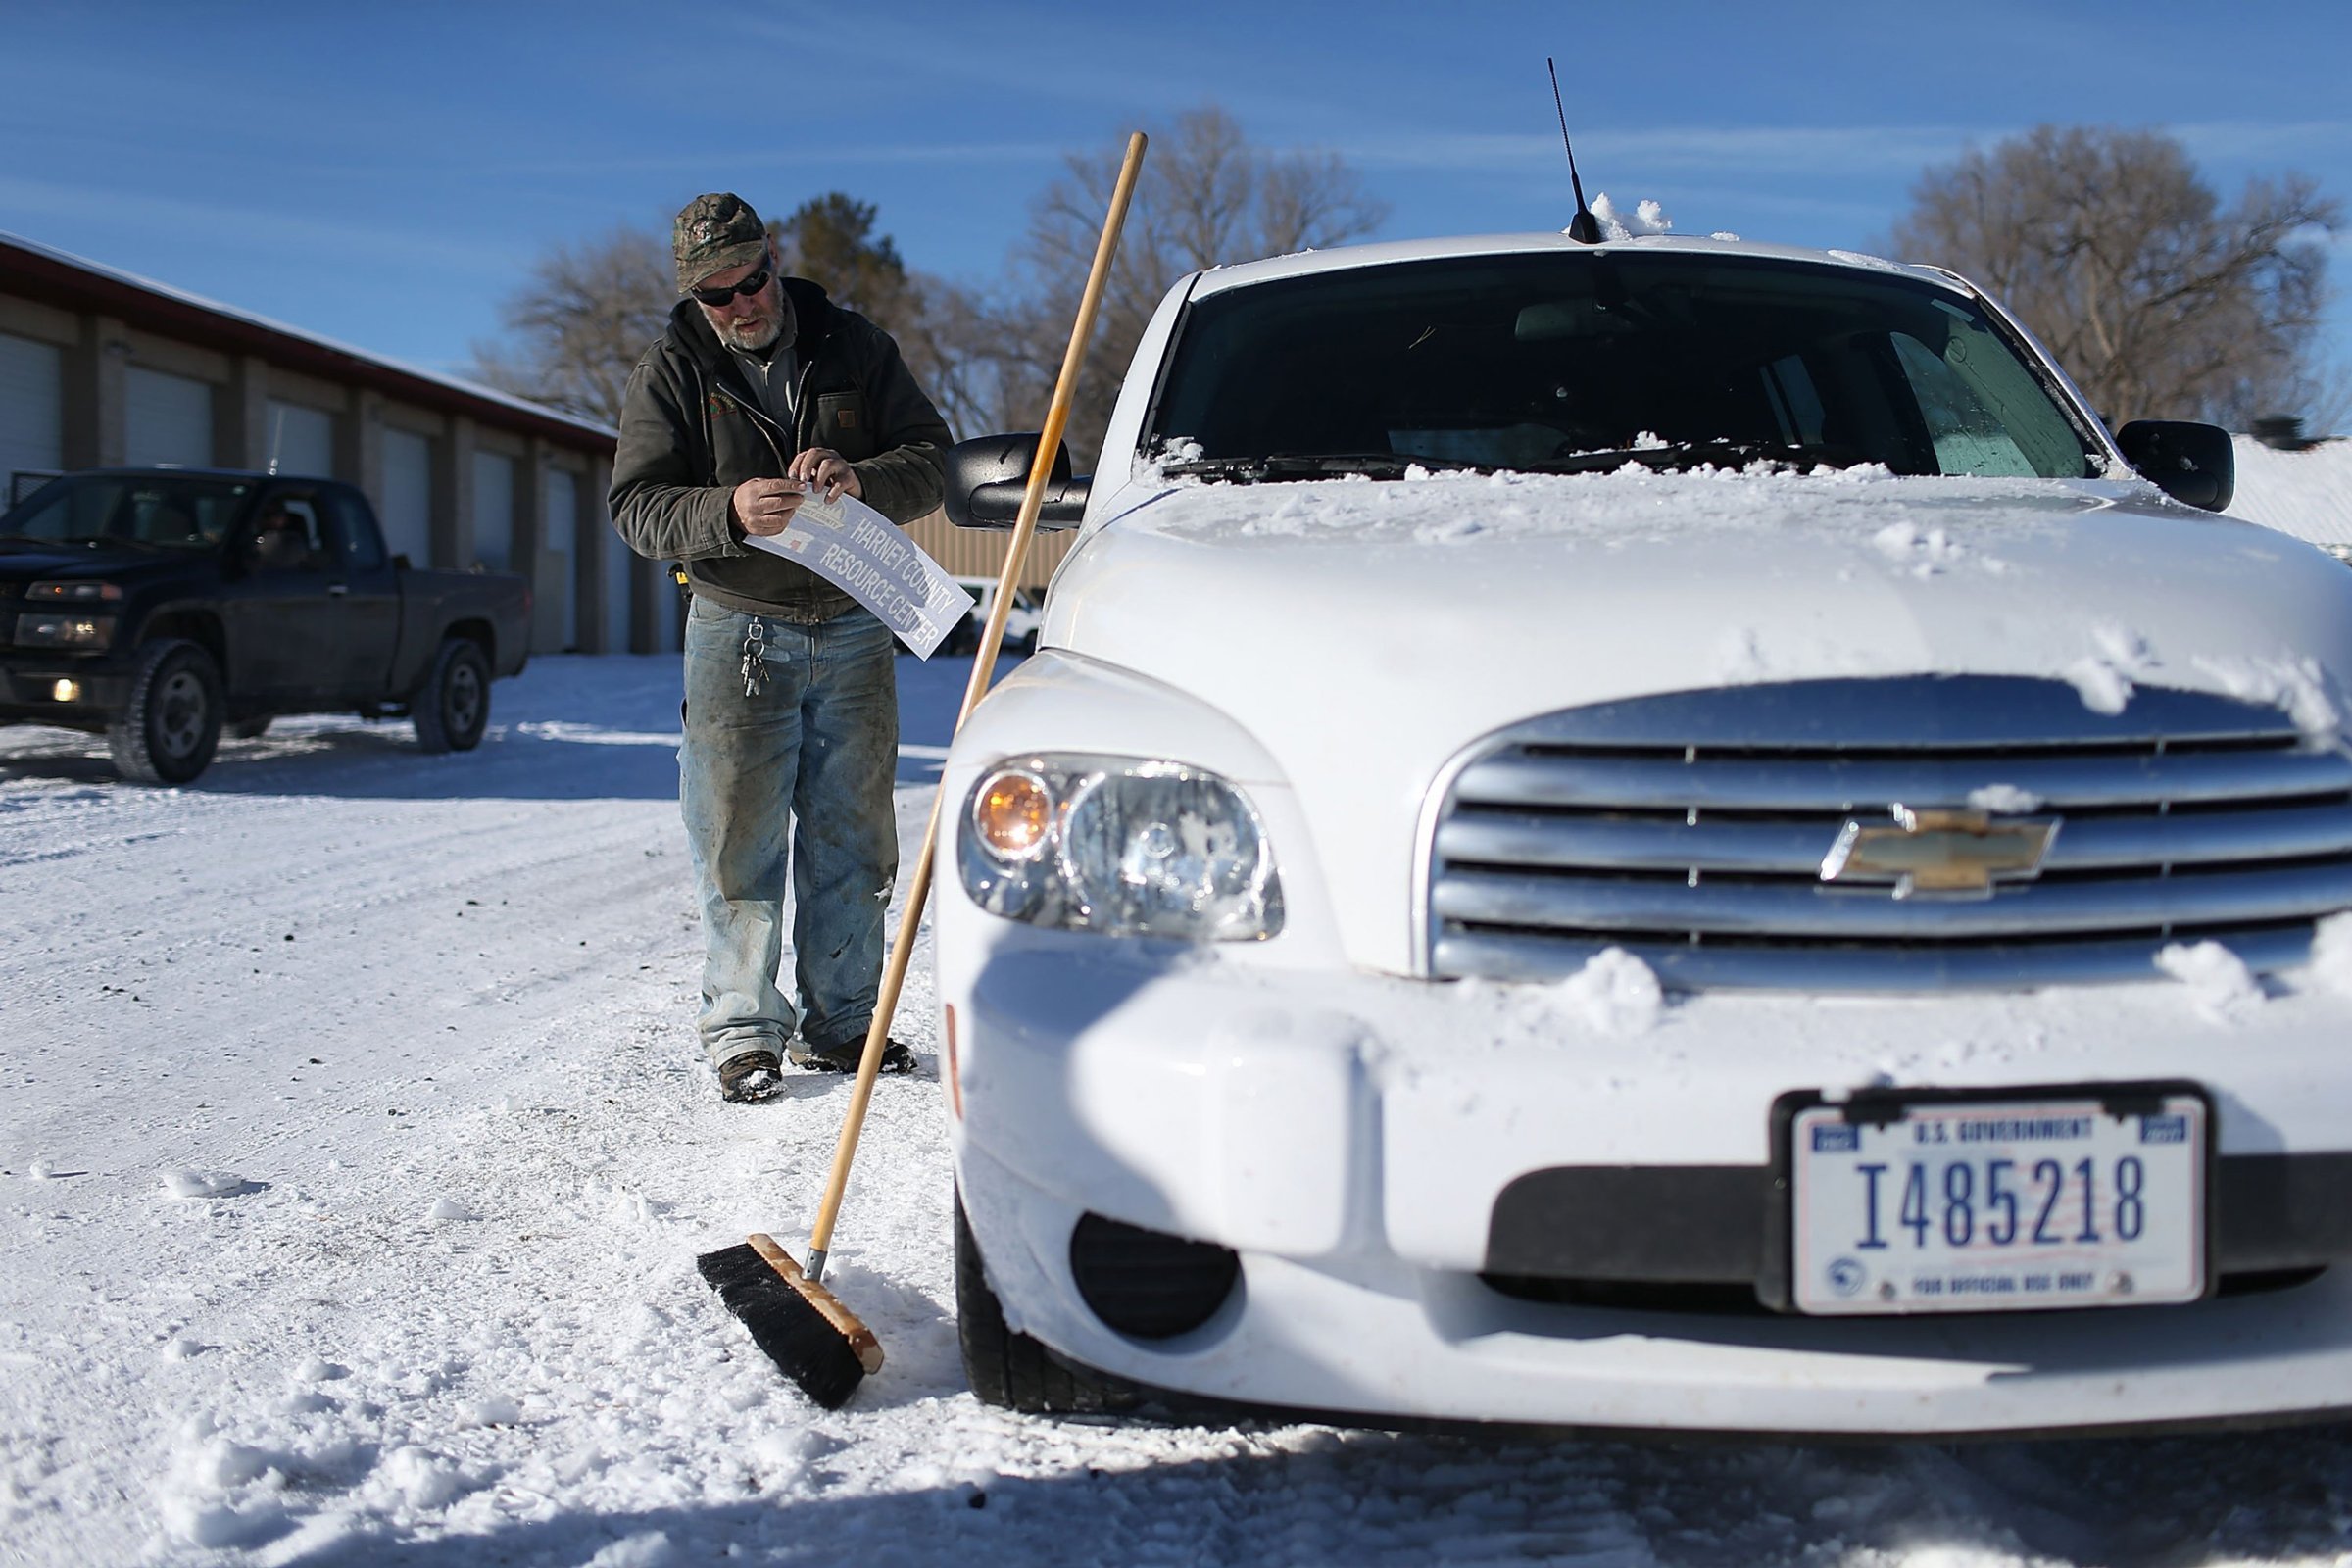 BURNS, OR - JANUARY 15: Ken Medenbach prepares to paste a Harney County sticker on the side of a U.S. Government vehicle as a group continues to occupy the Malheur National Wildlife Refuge headquarters on January 15, 2016 near Burns, Oregon. The armed anti-government militia group continues to occupy the Malheur National Wildlife Headquarters as they protest the jailing of two ranchers for arson. (Photo by Joe Raedle/Getty Images)